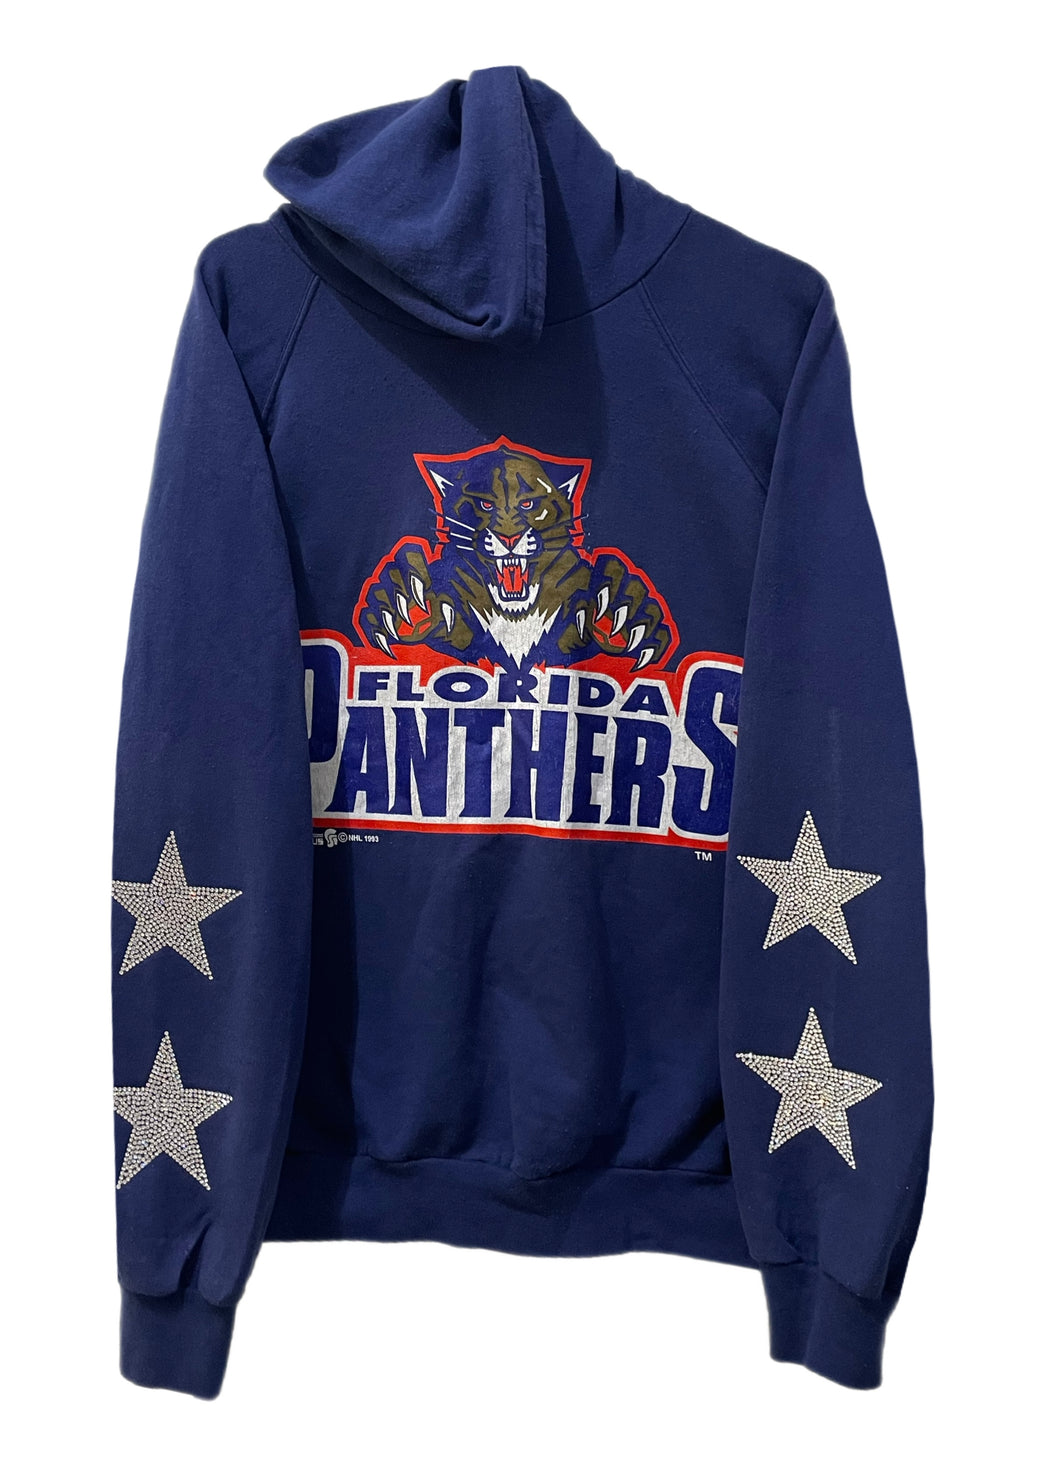 Florida Panthers, Hockey One of a KIND Vintage Hoodie with Crystal Star Design